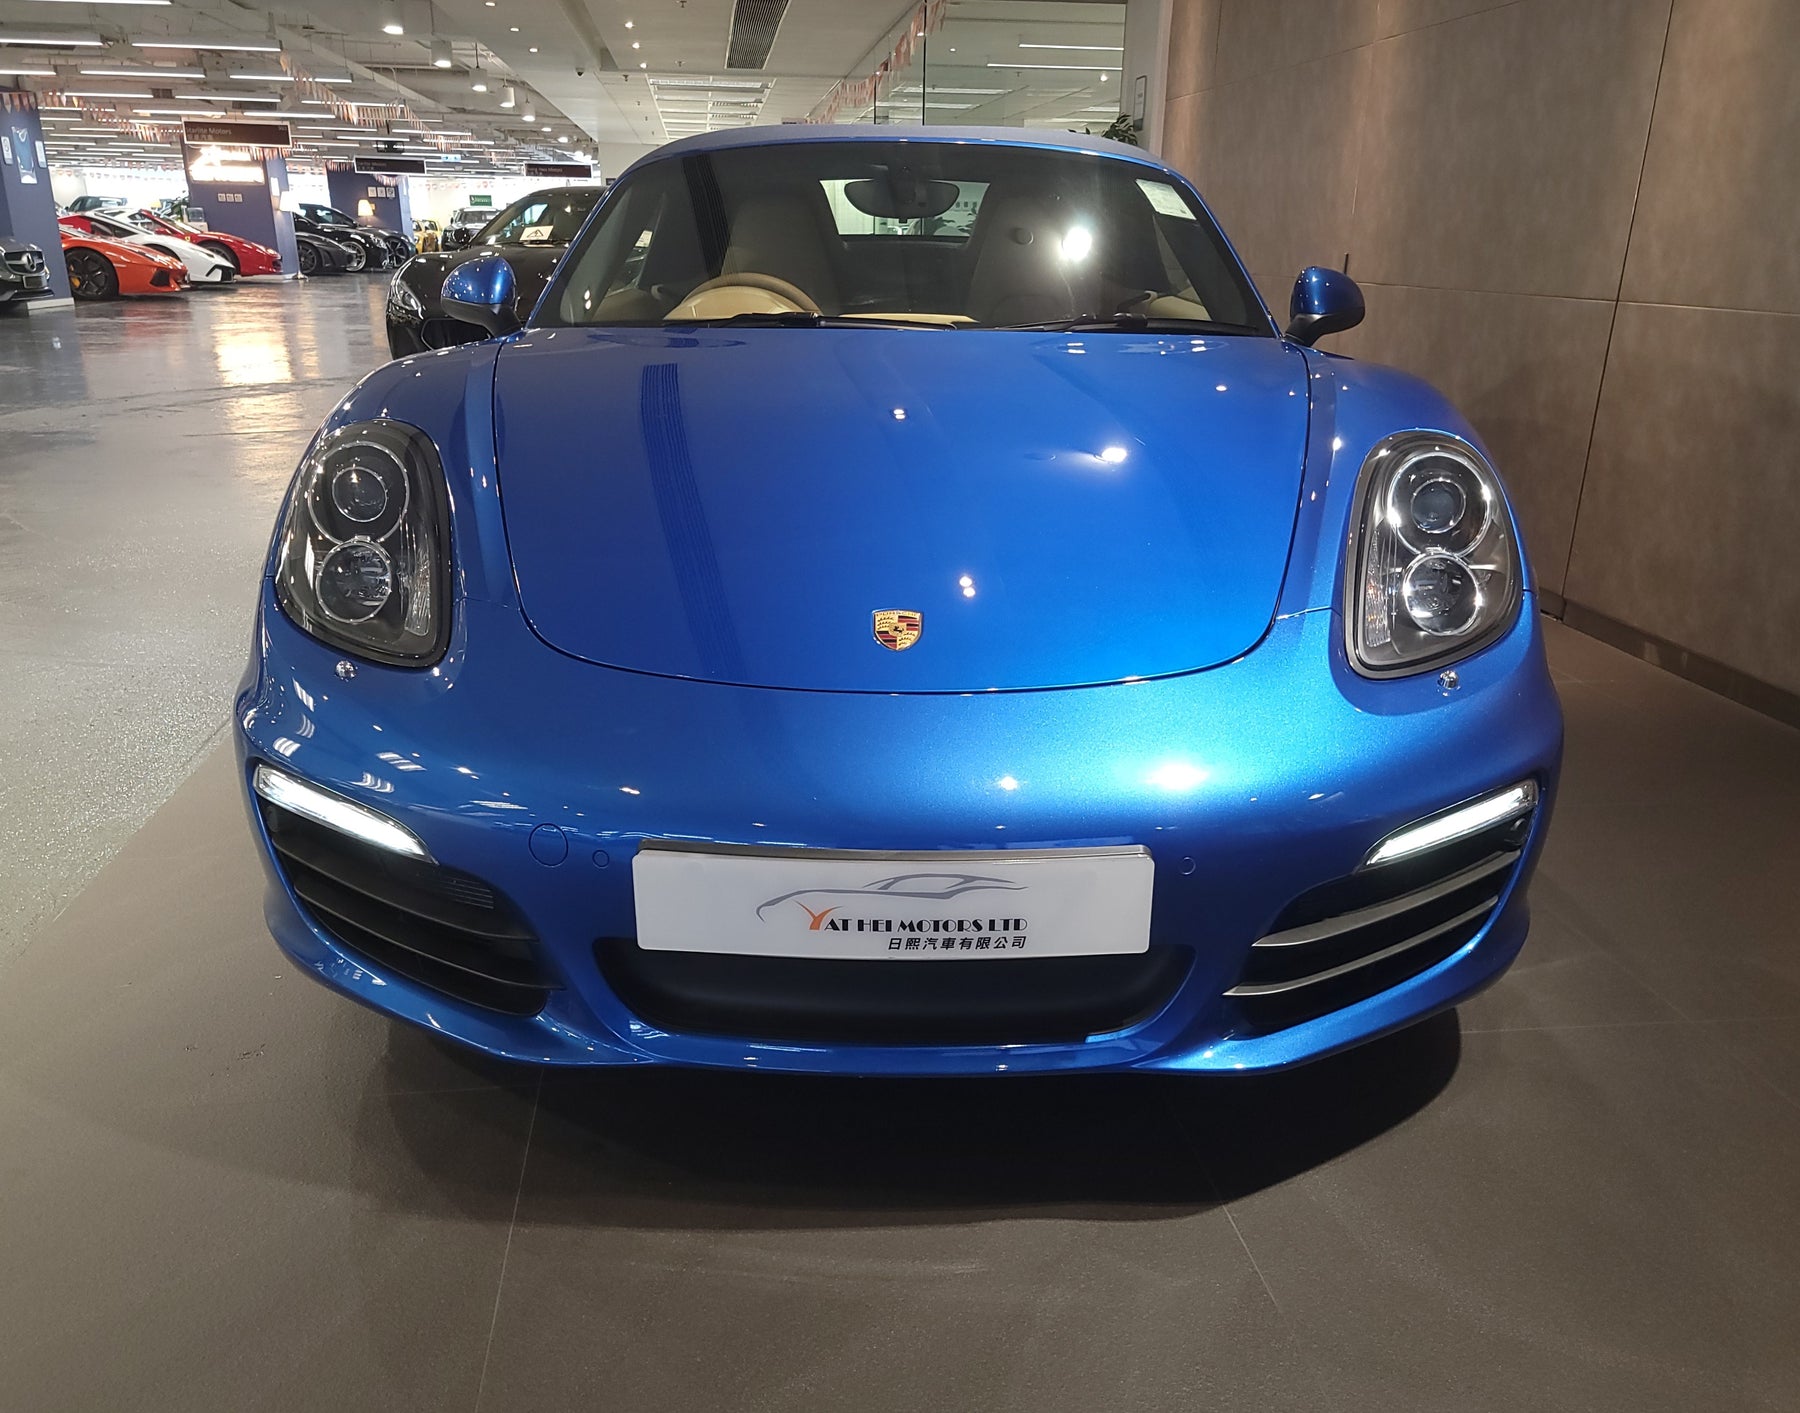 2014 Boxster S